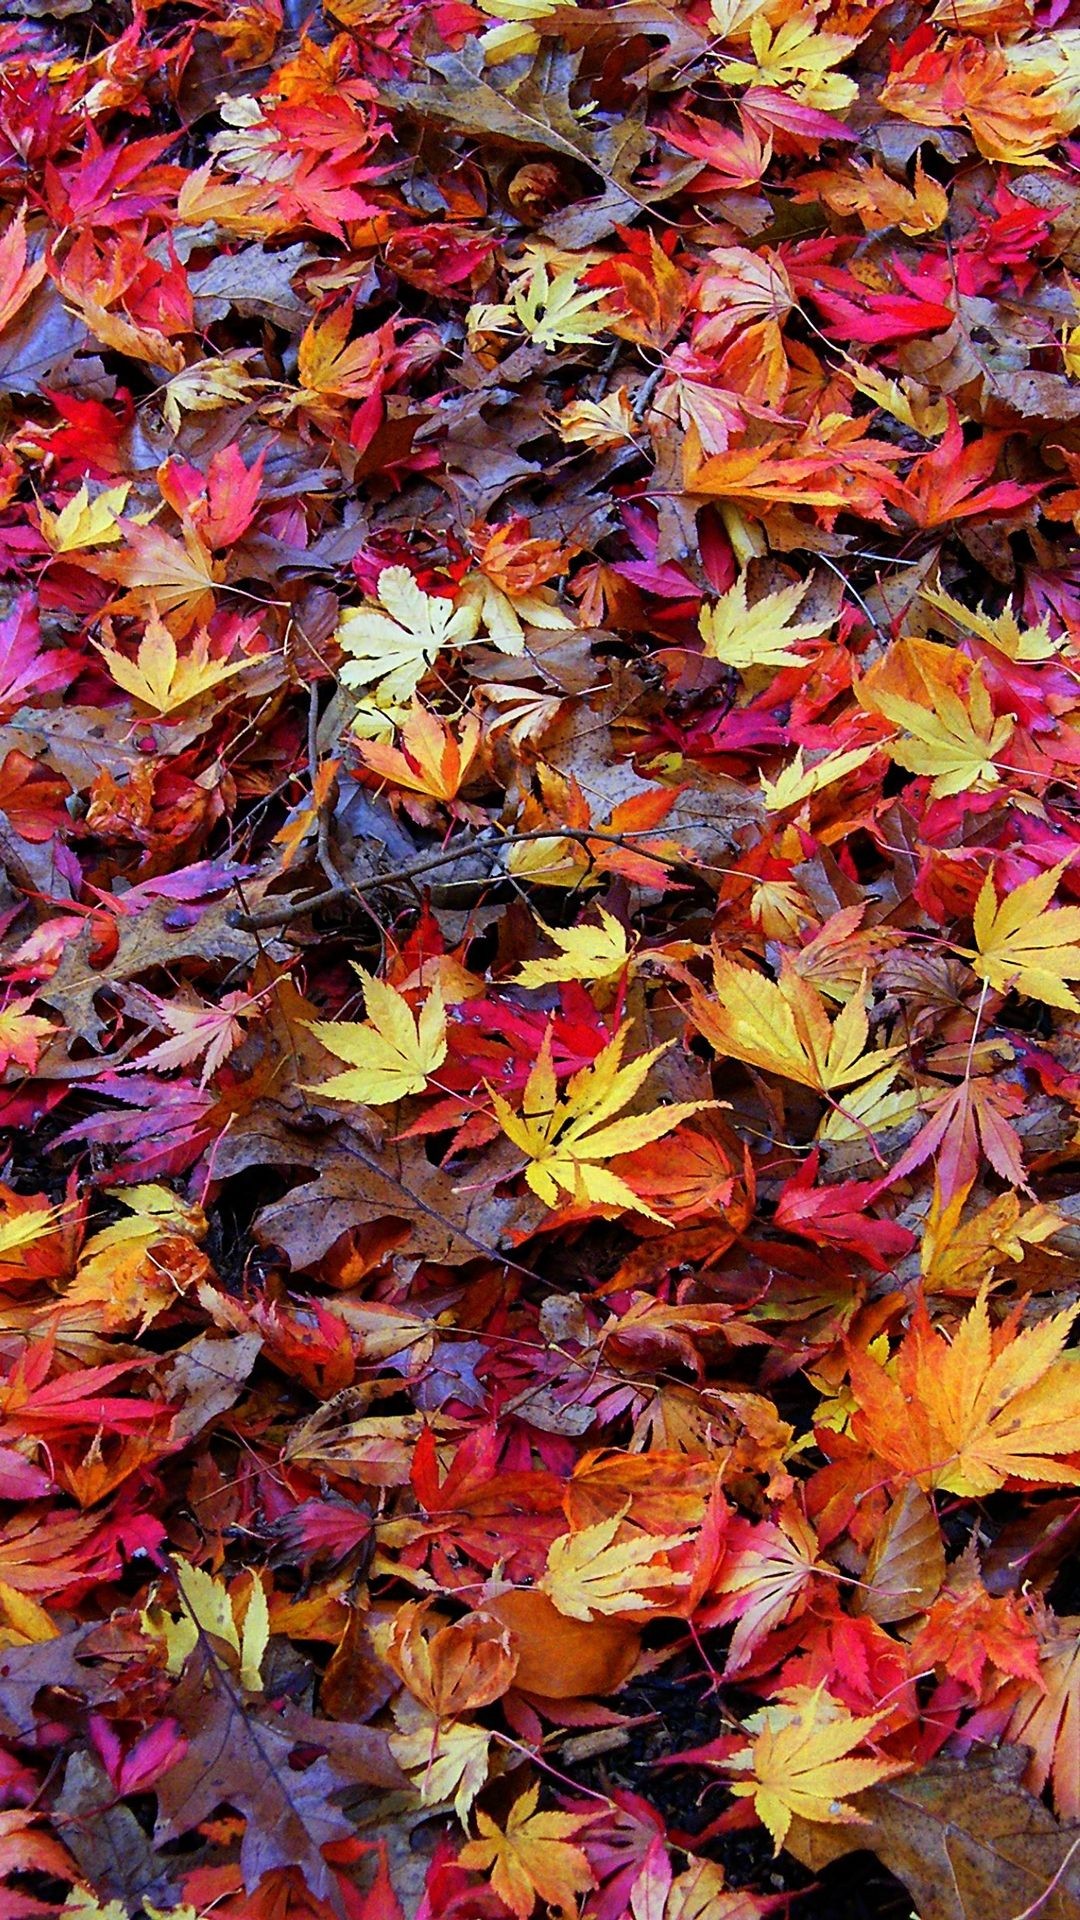 Autumn Wallpaper Hd For Iphone - Fall Backgrounds Iphone 6 - HD Wallpaper 